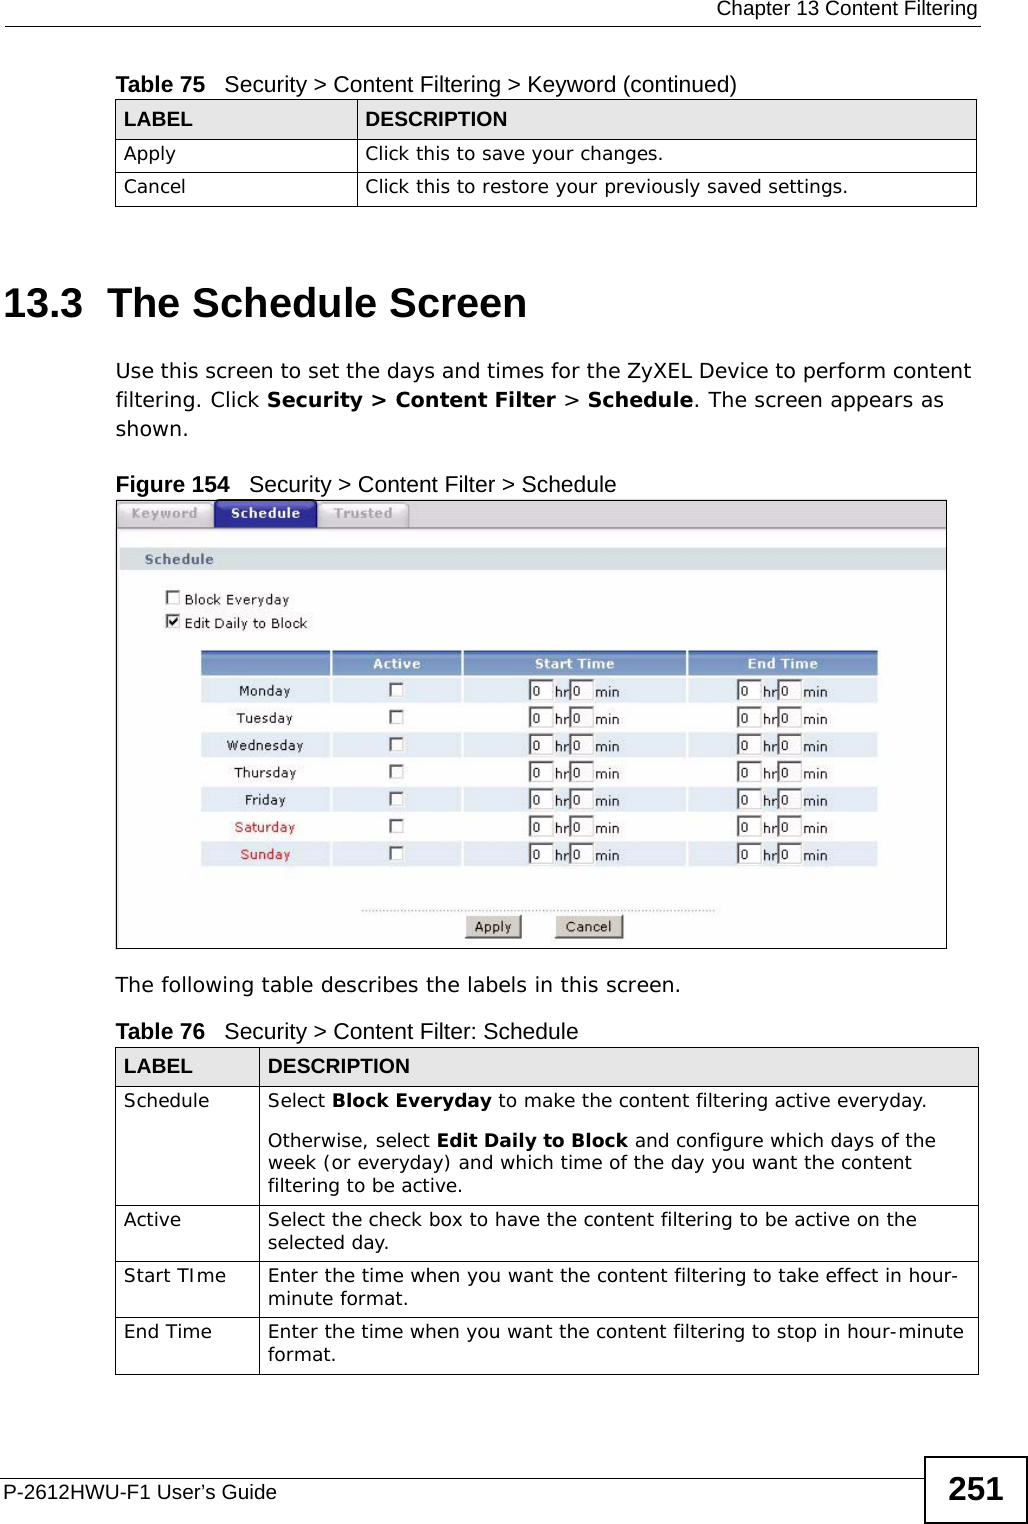  Chapter 13 Content FilteringP-2612HWU-F1 User’s Guide 25113.3  The Schedule Screen Use this screen to set the days and times for the ZyXEL Device to perform content filtering. Click Security &gt; Content Filter &gt; Schedule. The screen appears as shown.Figure 154   Security &gt; Content Filter &gt; ScheduleThe following table describes the labels in this screen.  Apply Click this to save your changes.Cancel Click this to restore your previously saved settings.Table 75   Security &gt; Content Filtering &gt; Keyword (continued)LABEL DESCRIPTIONTable 76   Security &gt; Content Filter: ScheduleLABEL DESCRIPTIONSchedule Select Block Everyday to make the content filtering active everyday.Otherwise, select Edit Daily to Block and configure which days of the week (or everyday) and which time of the day you want the content filtering to be active. Active Select the check box to have the content filtering to be active on the selected day.Start TIme Enter the time when you want the content filtering to take effect in hour-minute format.End Time Enter the time when you want the content filtering to stop in hour-minute format. 